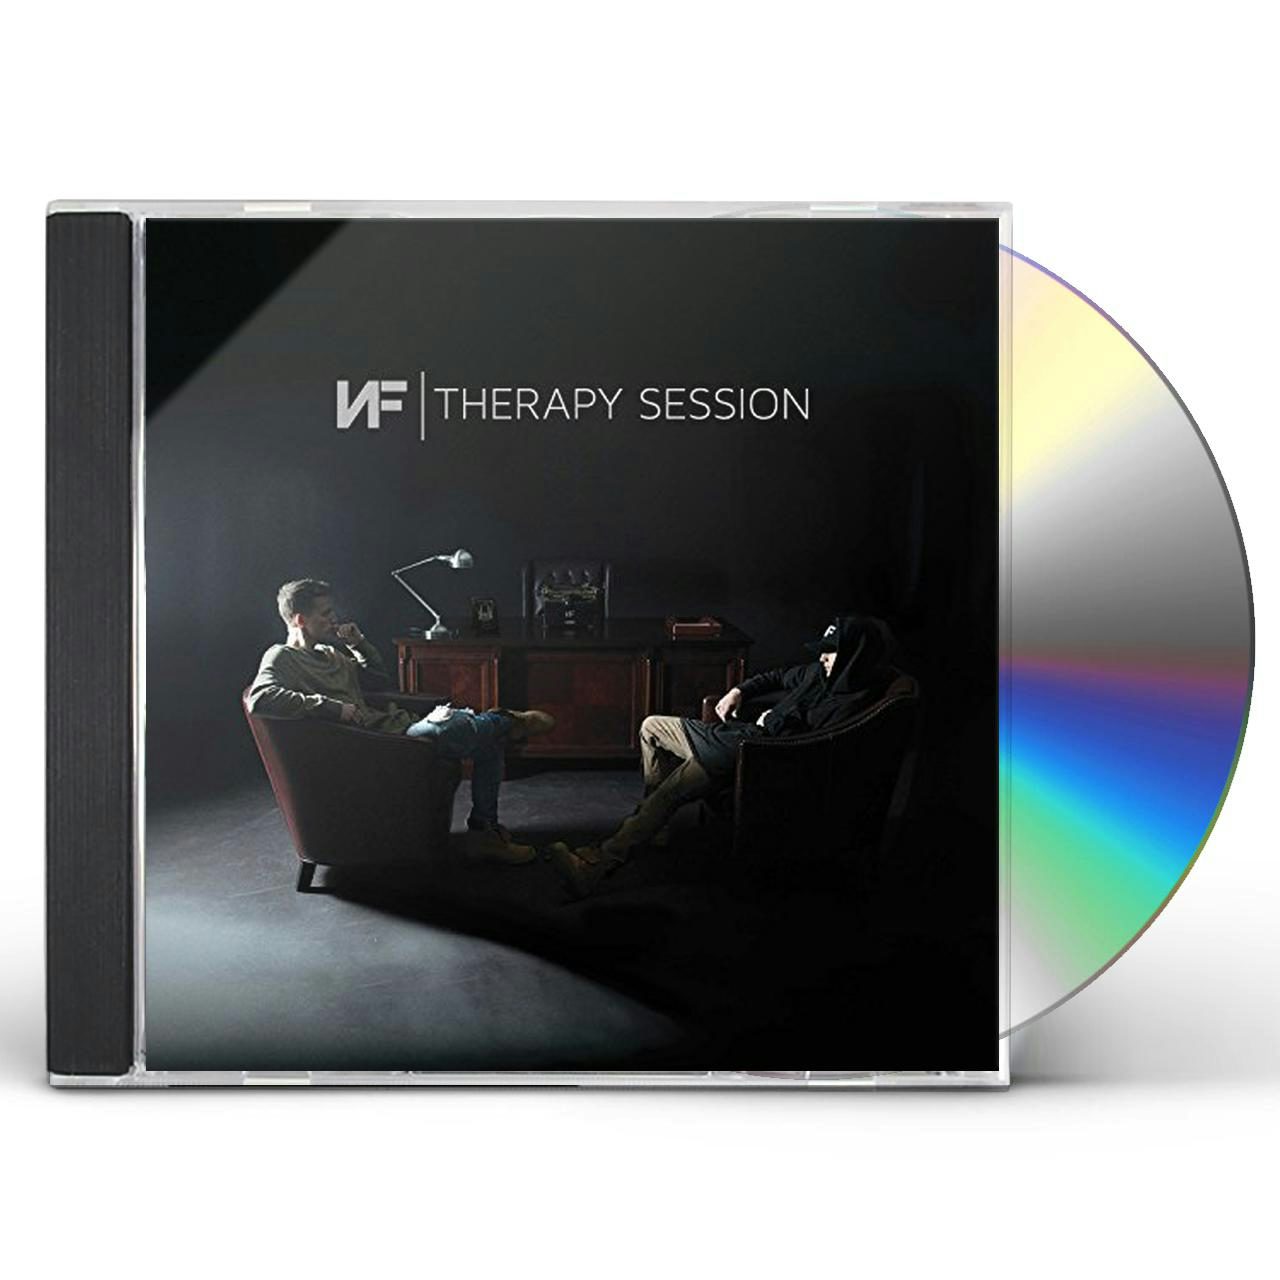 nf therapy session free download zip